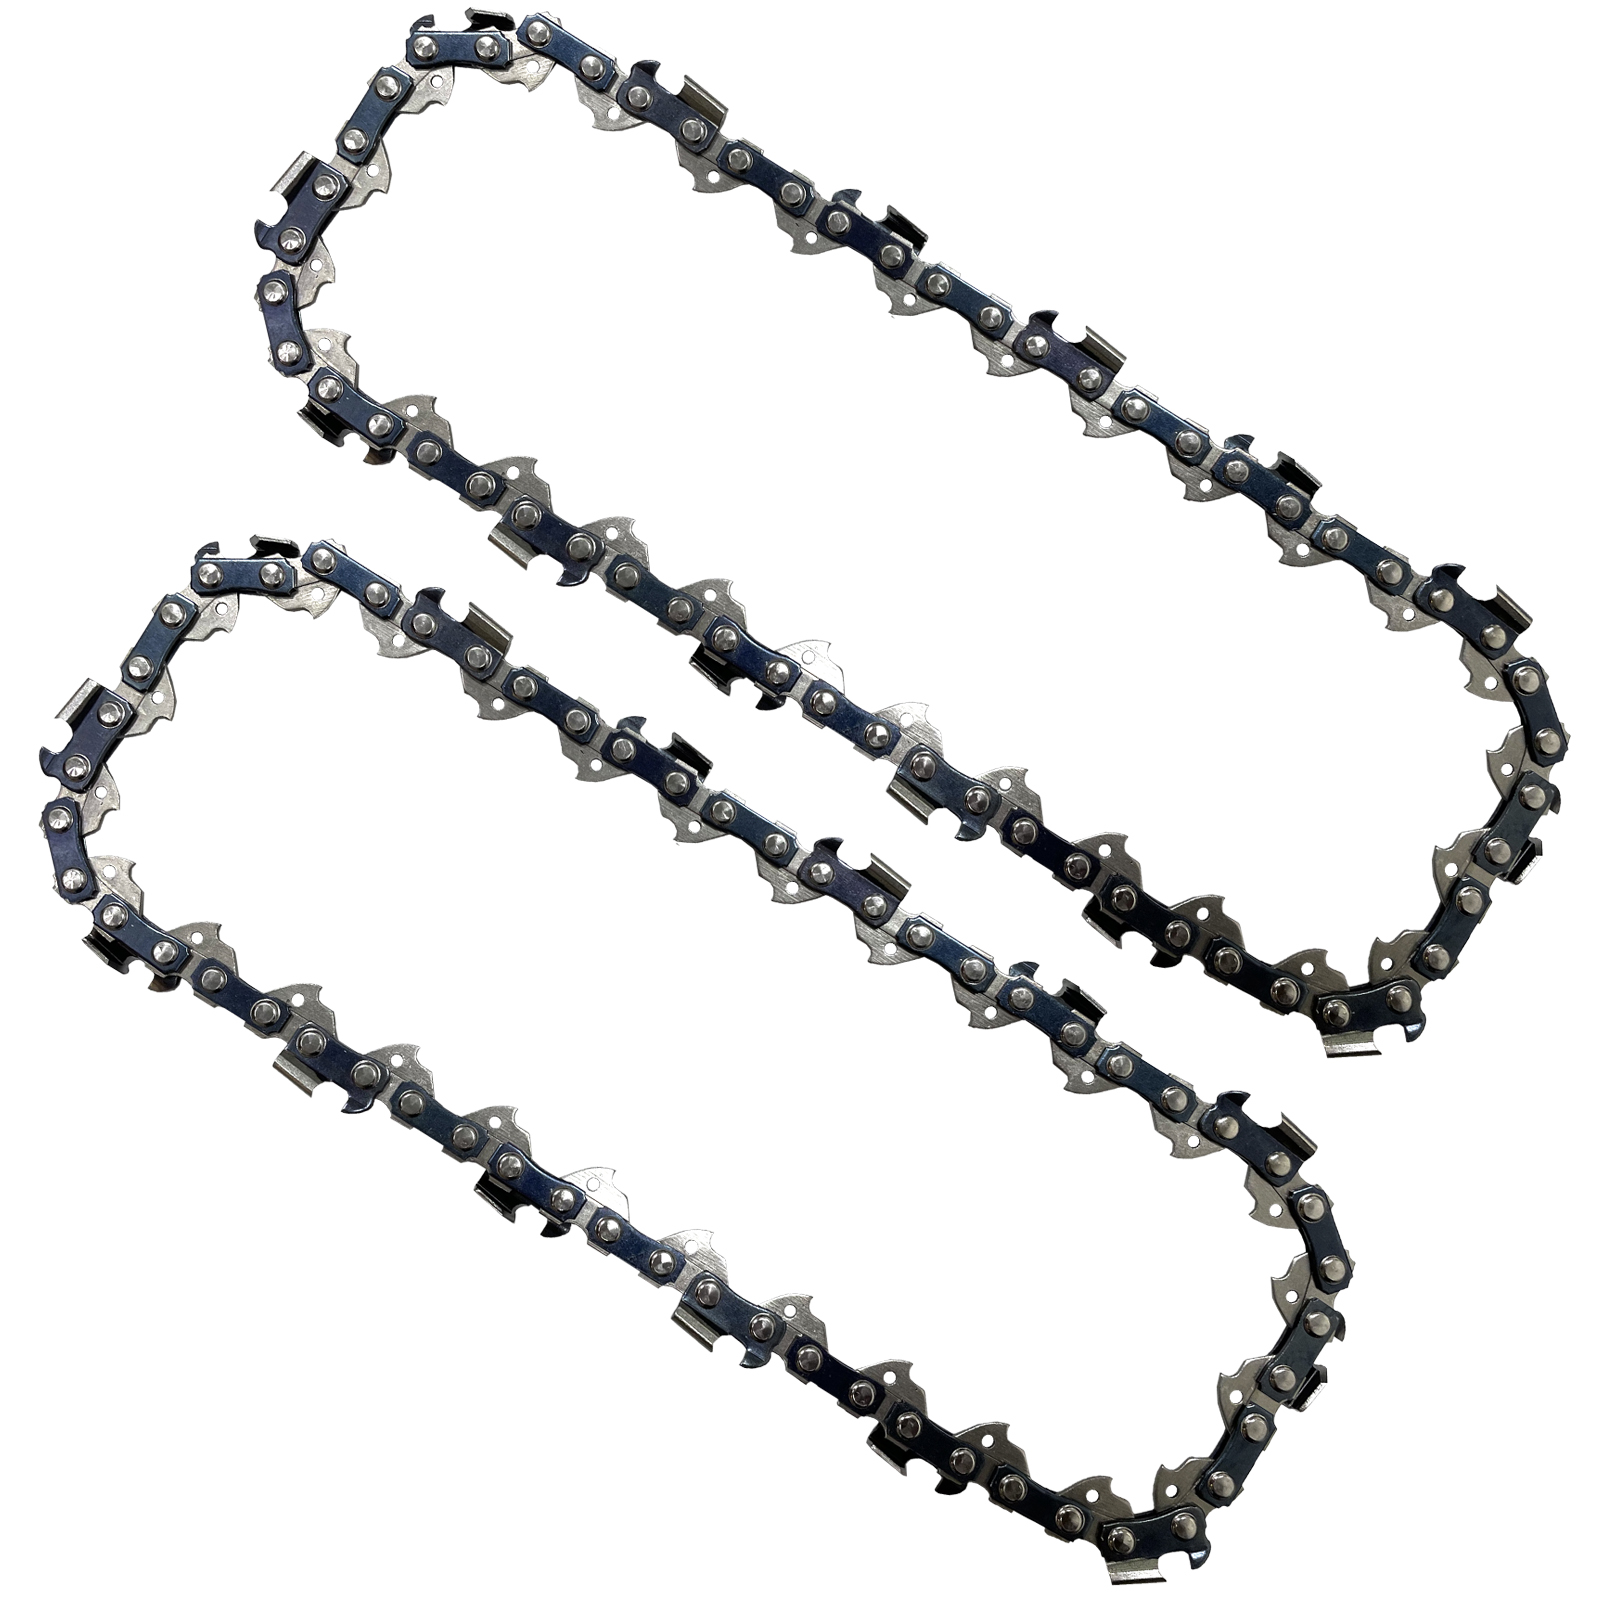 2PCS 6" Chainsaw Chain Replacement for Milwaukee M12 FUEL 12-Volt Lithium-Ion Chainsaw 3/8 043 28dl - image 2 of 7